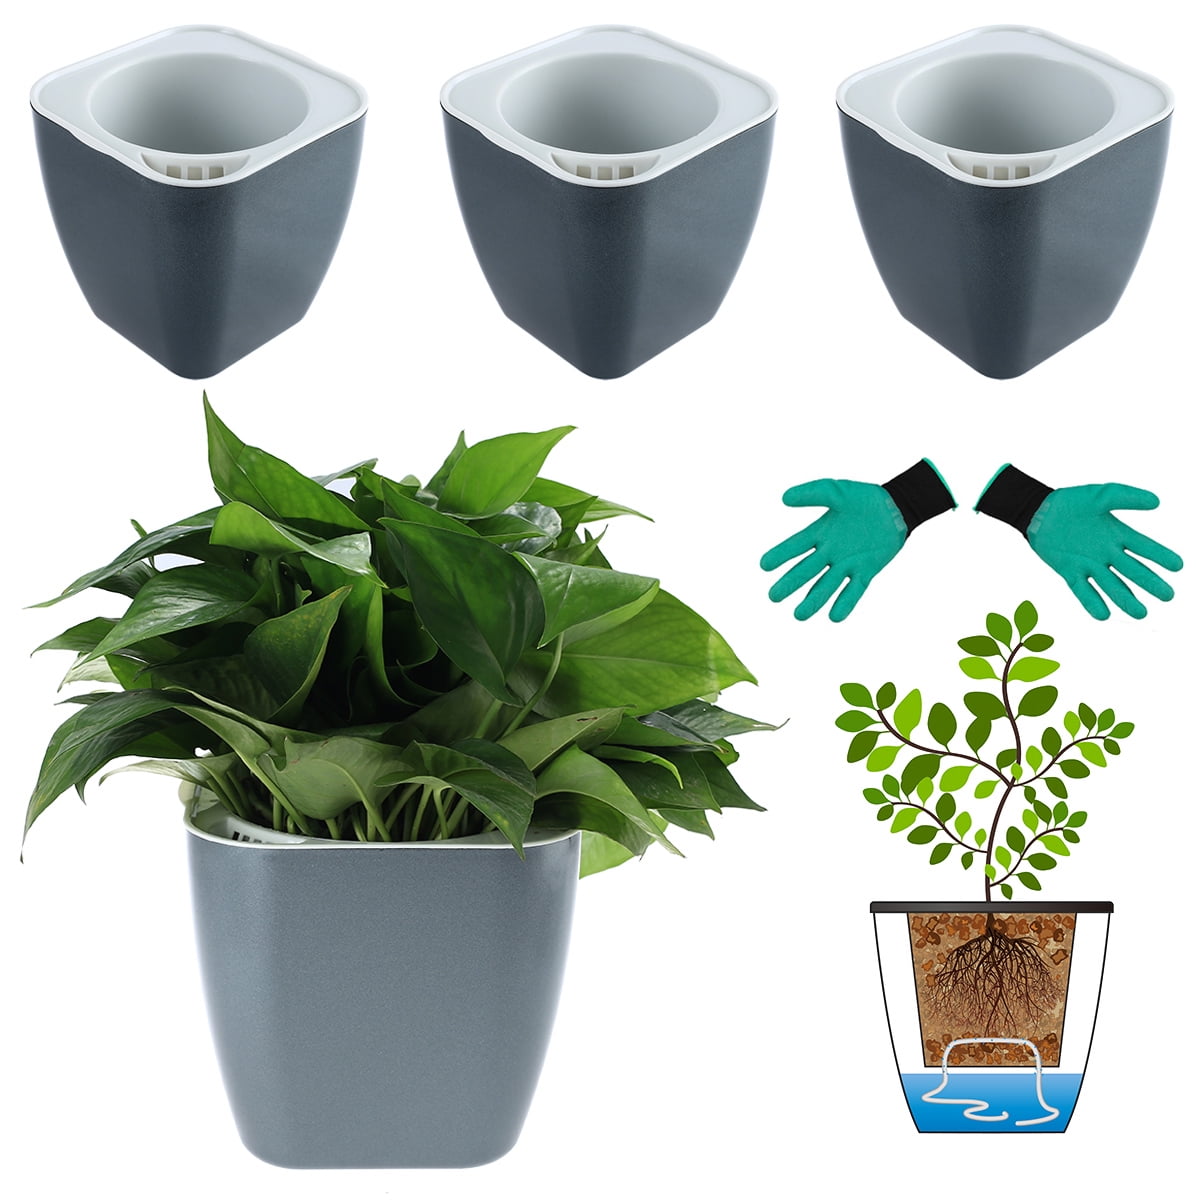 Vencer 6 Pack Self Watering Hanging Planter Flower Pot Suitable for All Plants,Herbs,African Violets,Succulents,Flowers Or Start Plants,Blue,VF-060B